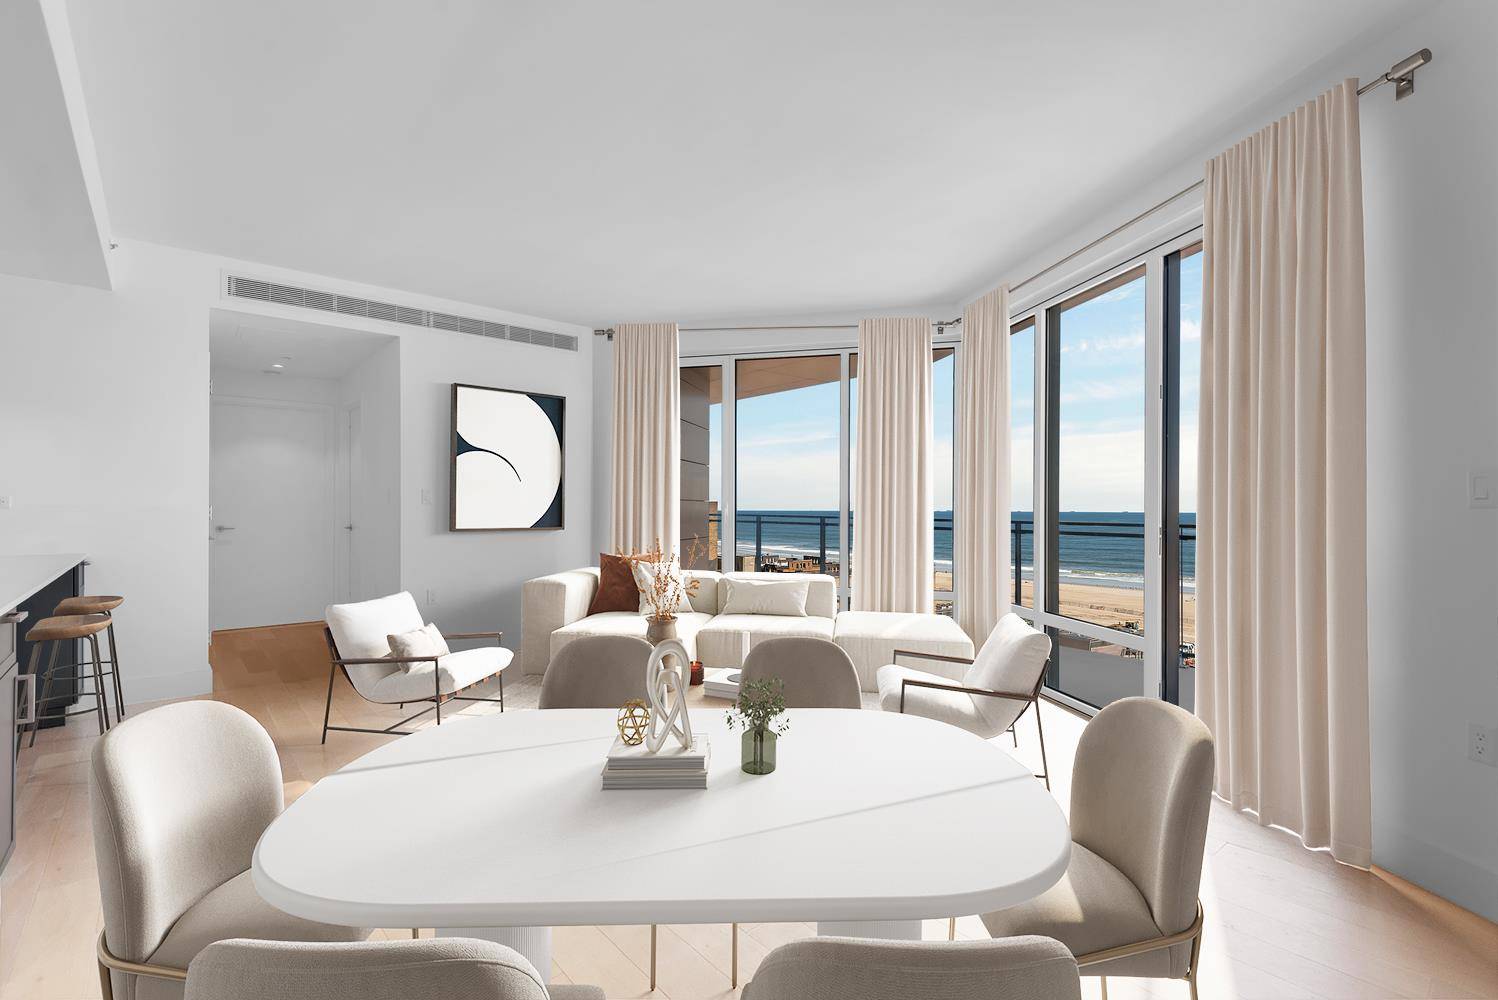 NON SPONSOR UNIT Welcome to ONE SIXTEEN, home to Penthouse D which spans 1, 435 interior and 255 exterior square feet, offering 3 bedrooms and 2 bathrooms in this sunbathed ...